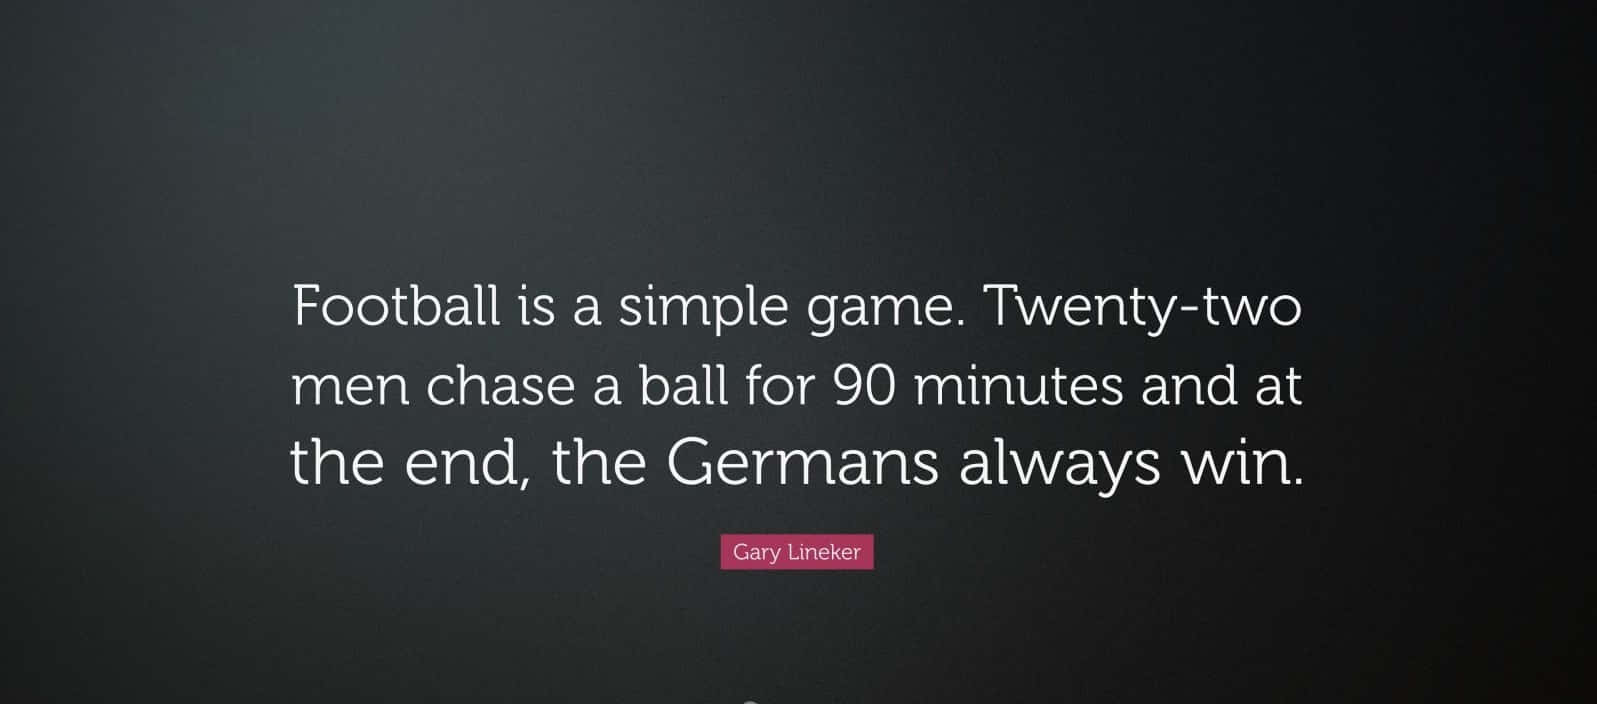 Gary Lineker Football Quote Simple Game Wallpaper